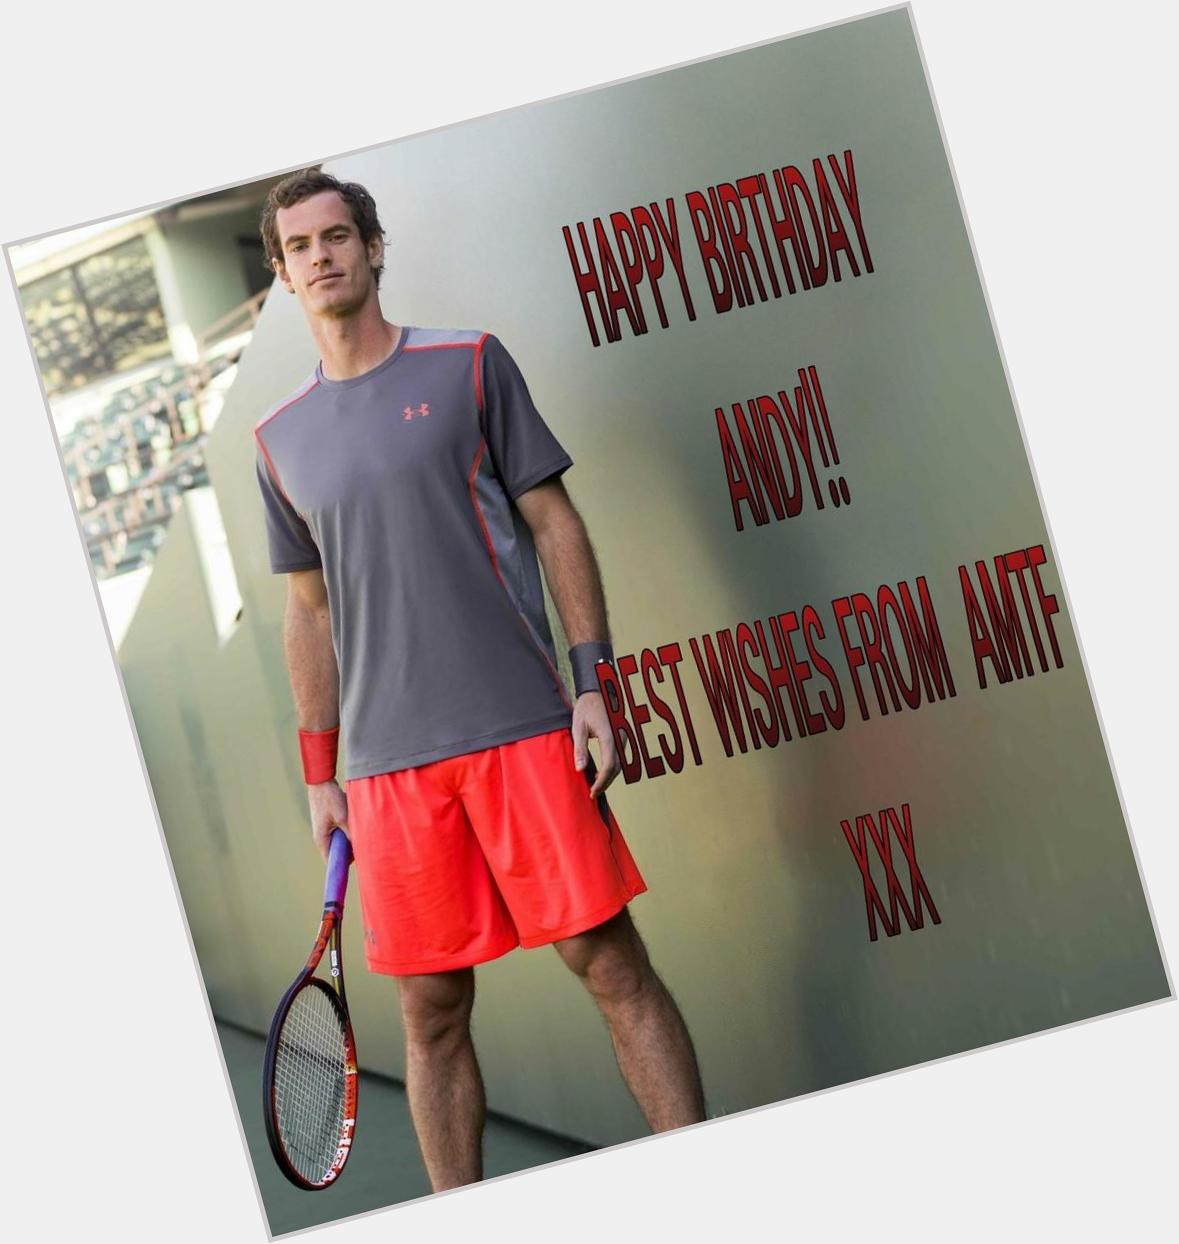  Happy Birthday Andy love from Andy Murray Tennis Fans Facebook group x x x 